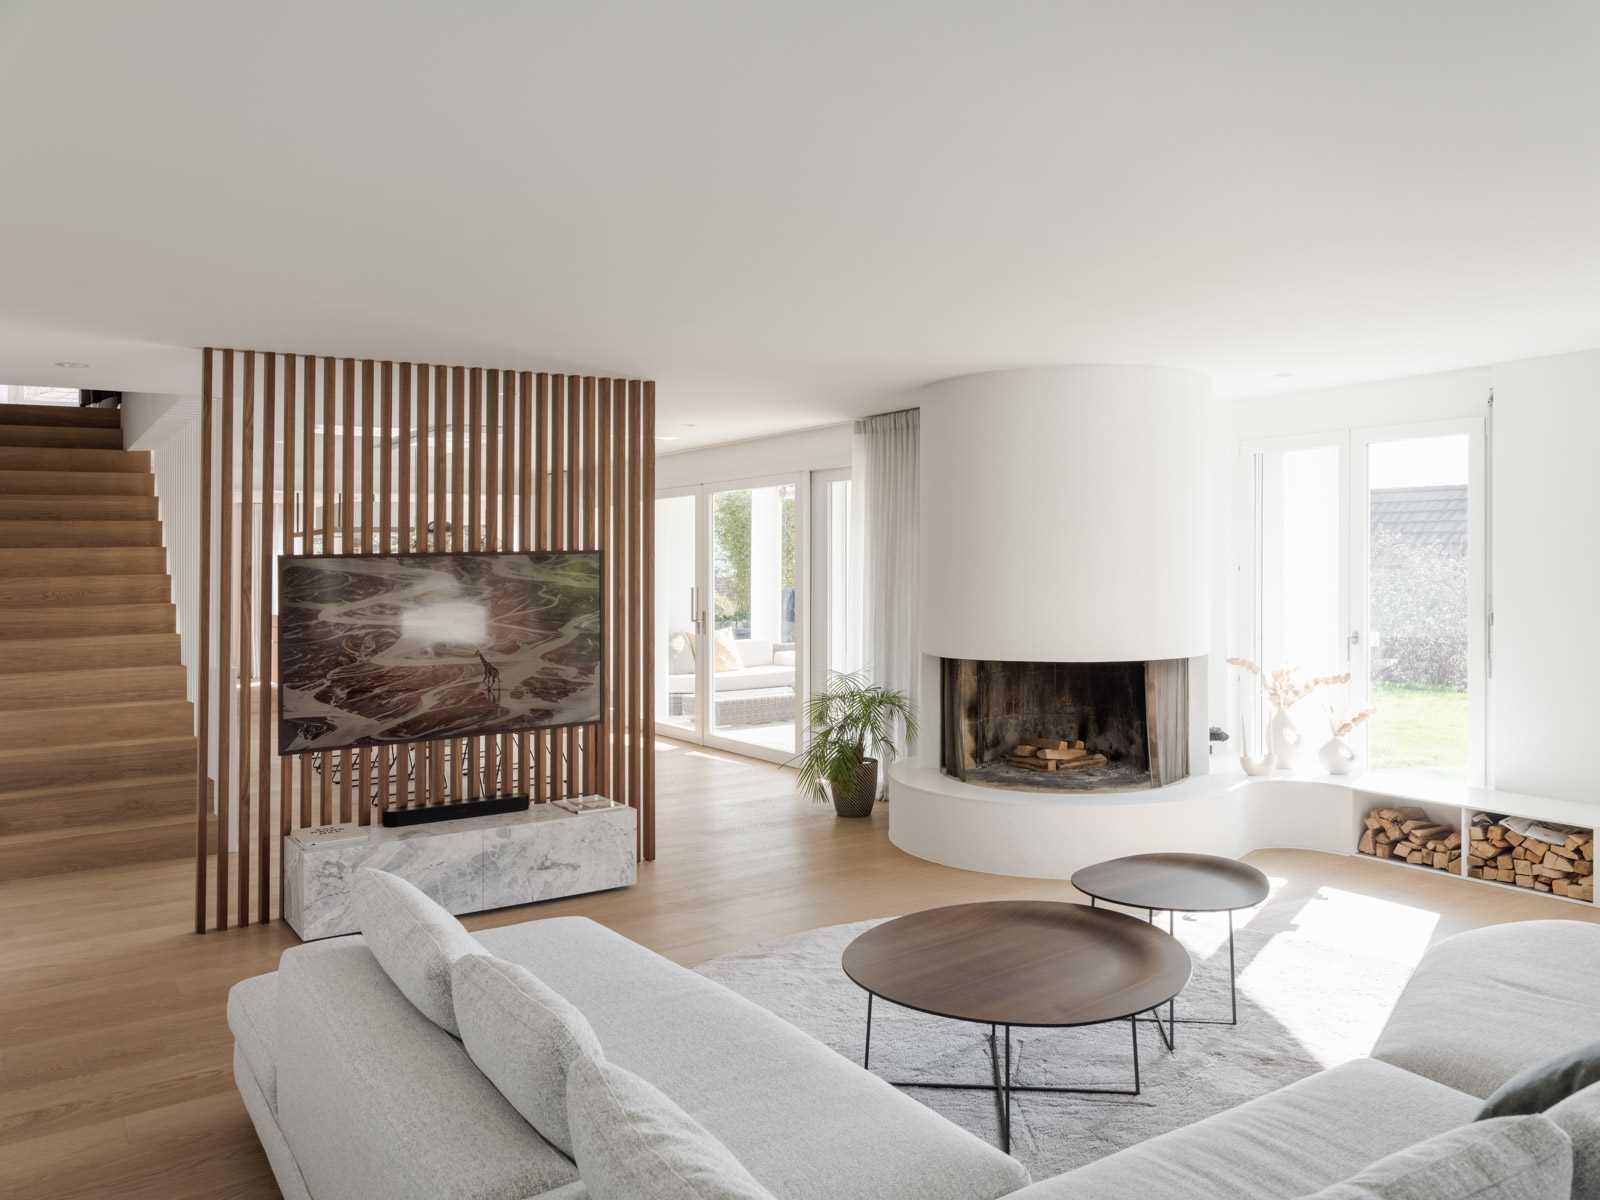 This modern living room includes a rounded fireplace and a wood slat tv wall that acts as a partition with the dining area, and somewhat hides the stairs from view.